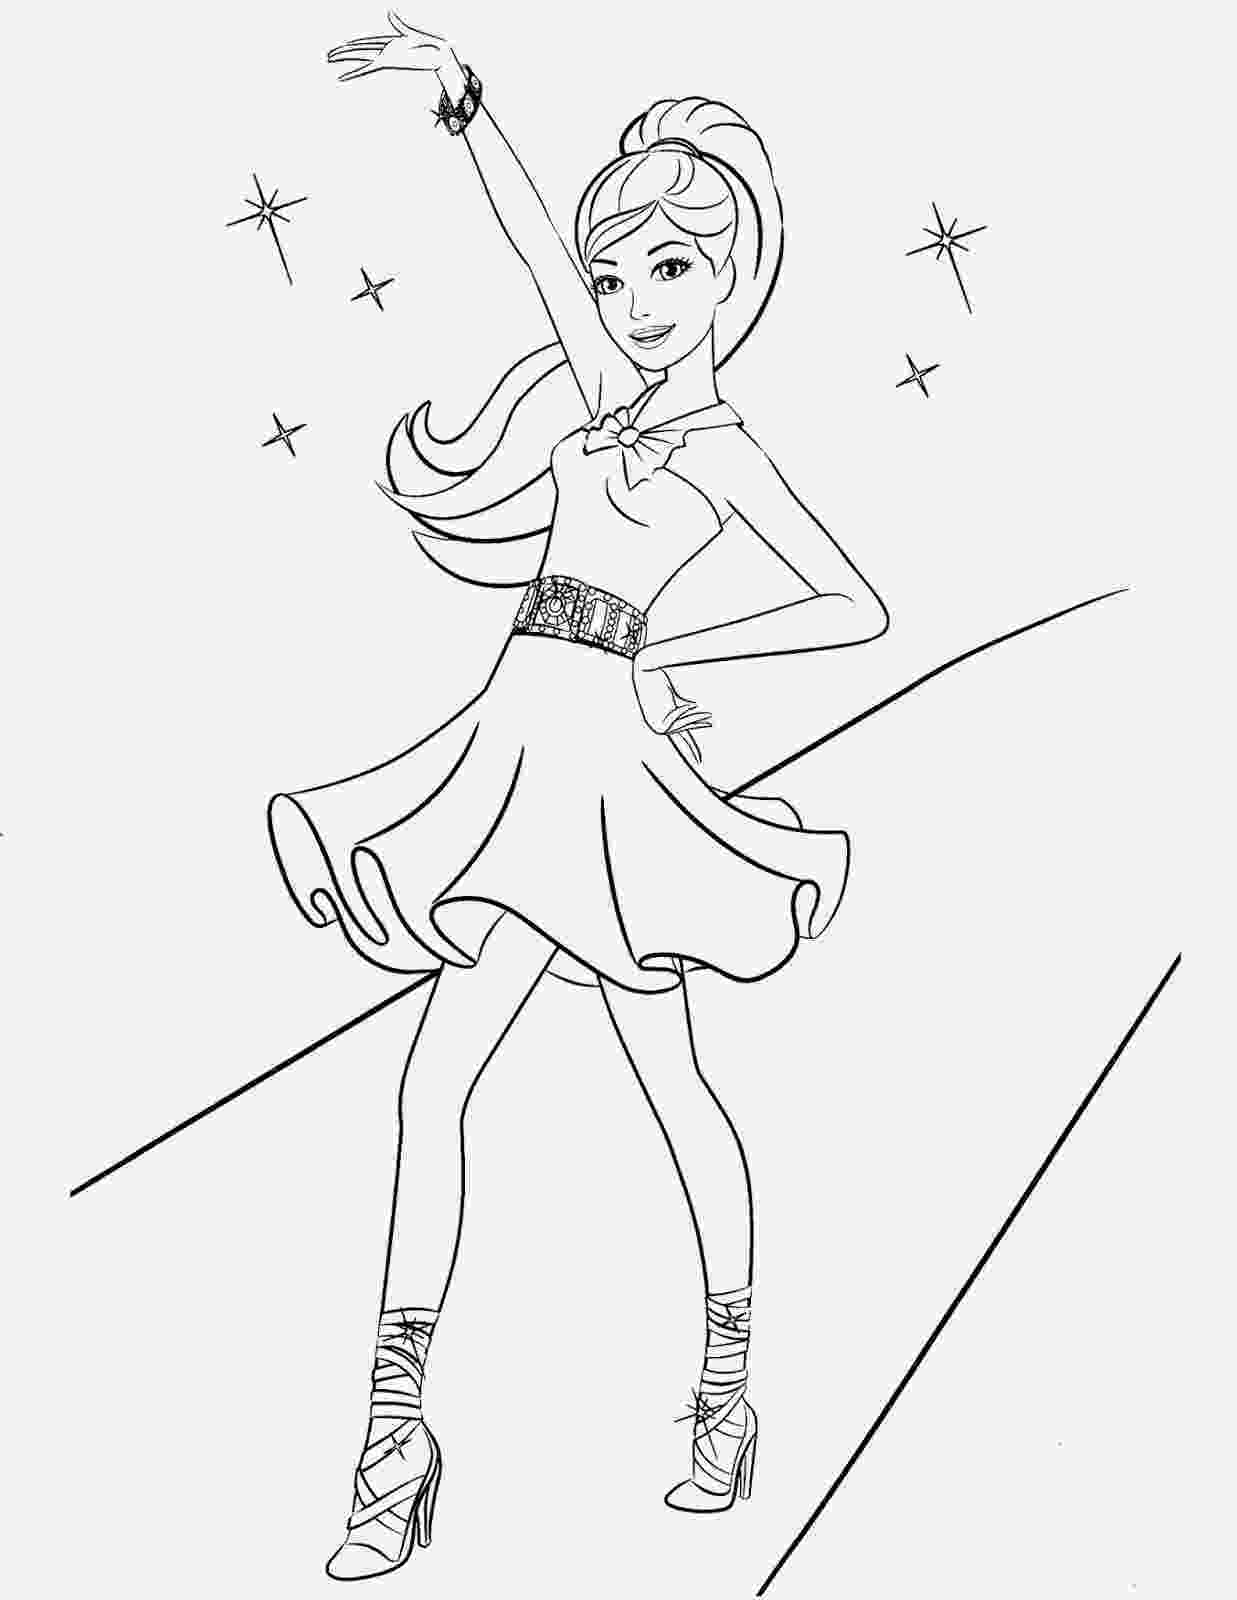 barbie sketch for colouring coloring pictures of dolls image sketches galleries sketch colouring barbie for 